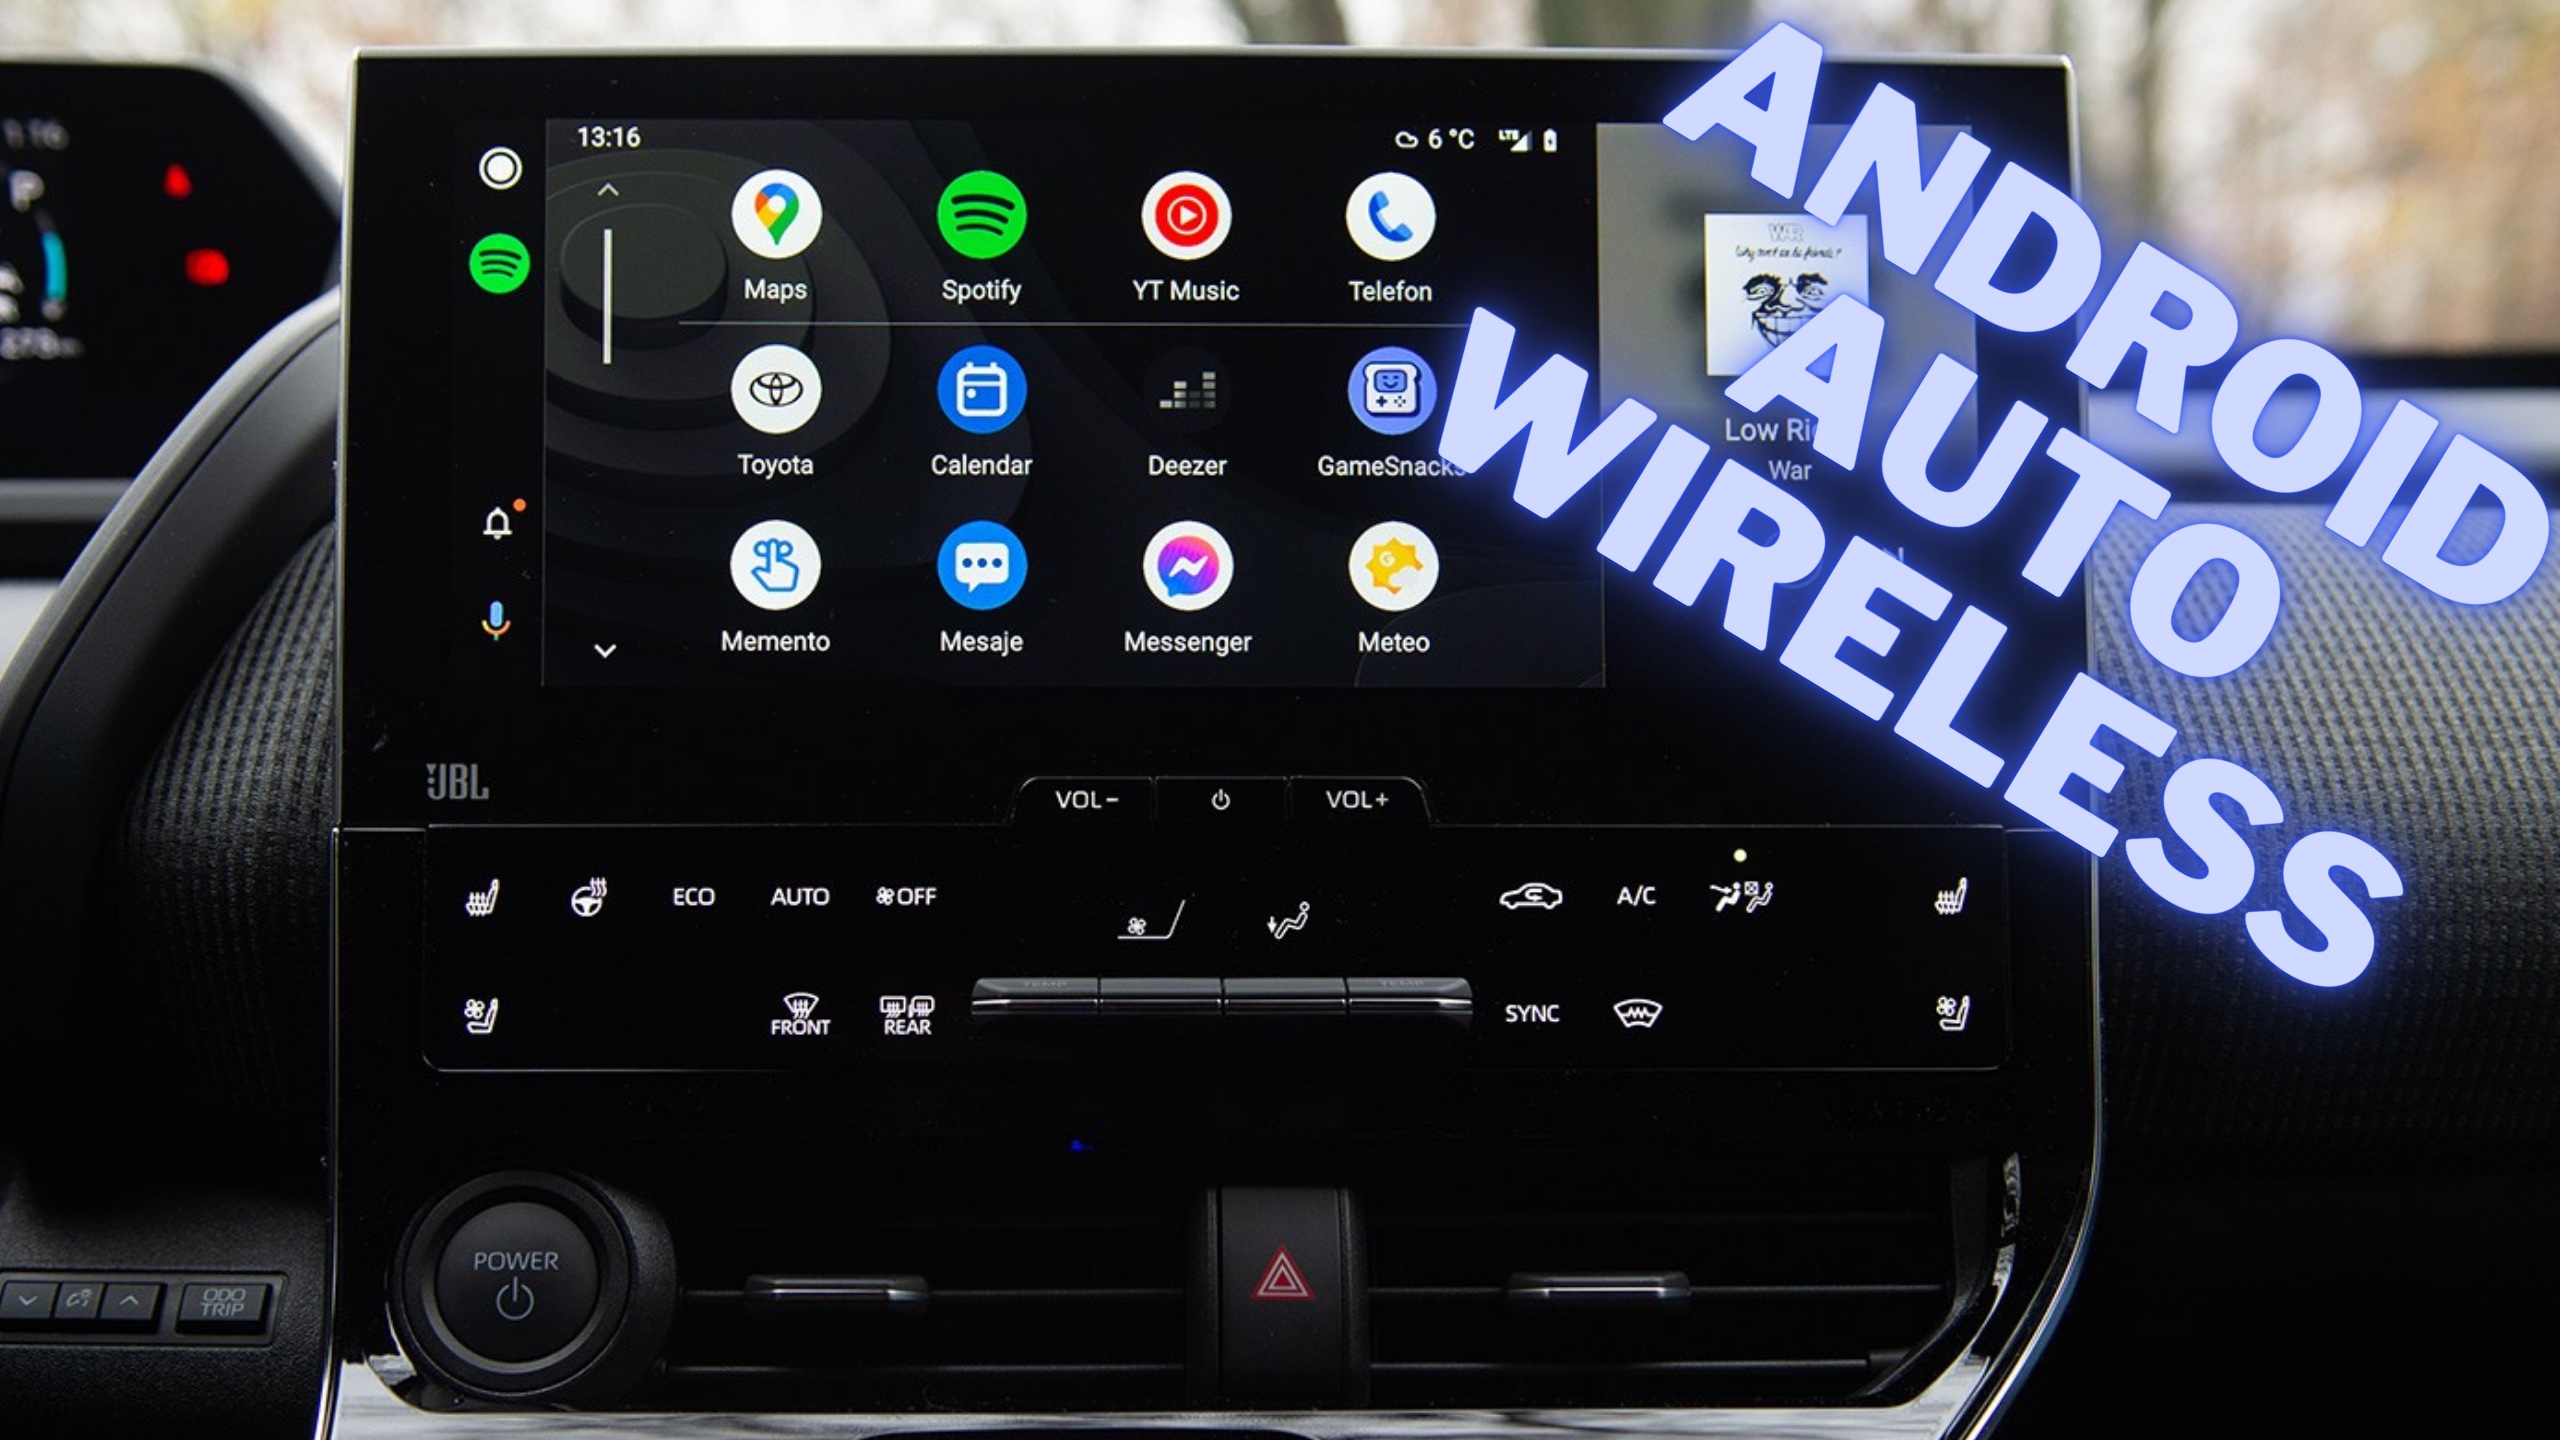 https://s1.cdn.autoevolution.com/images/news/how-wireless-android-auto-adapters-work-214645_1.jpg